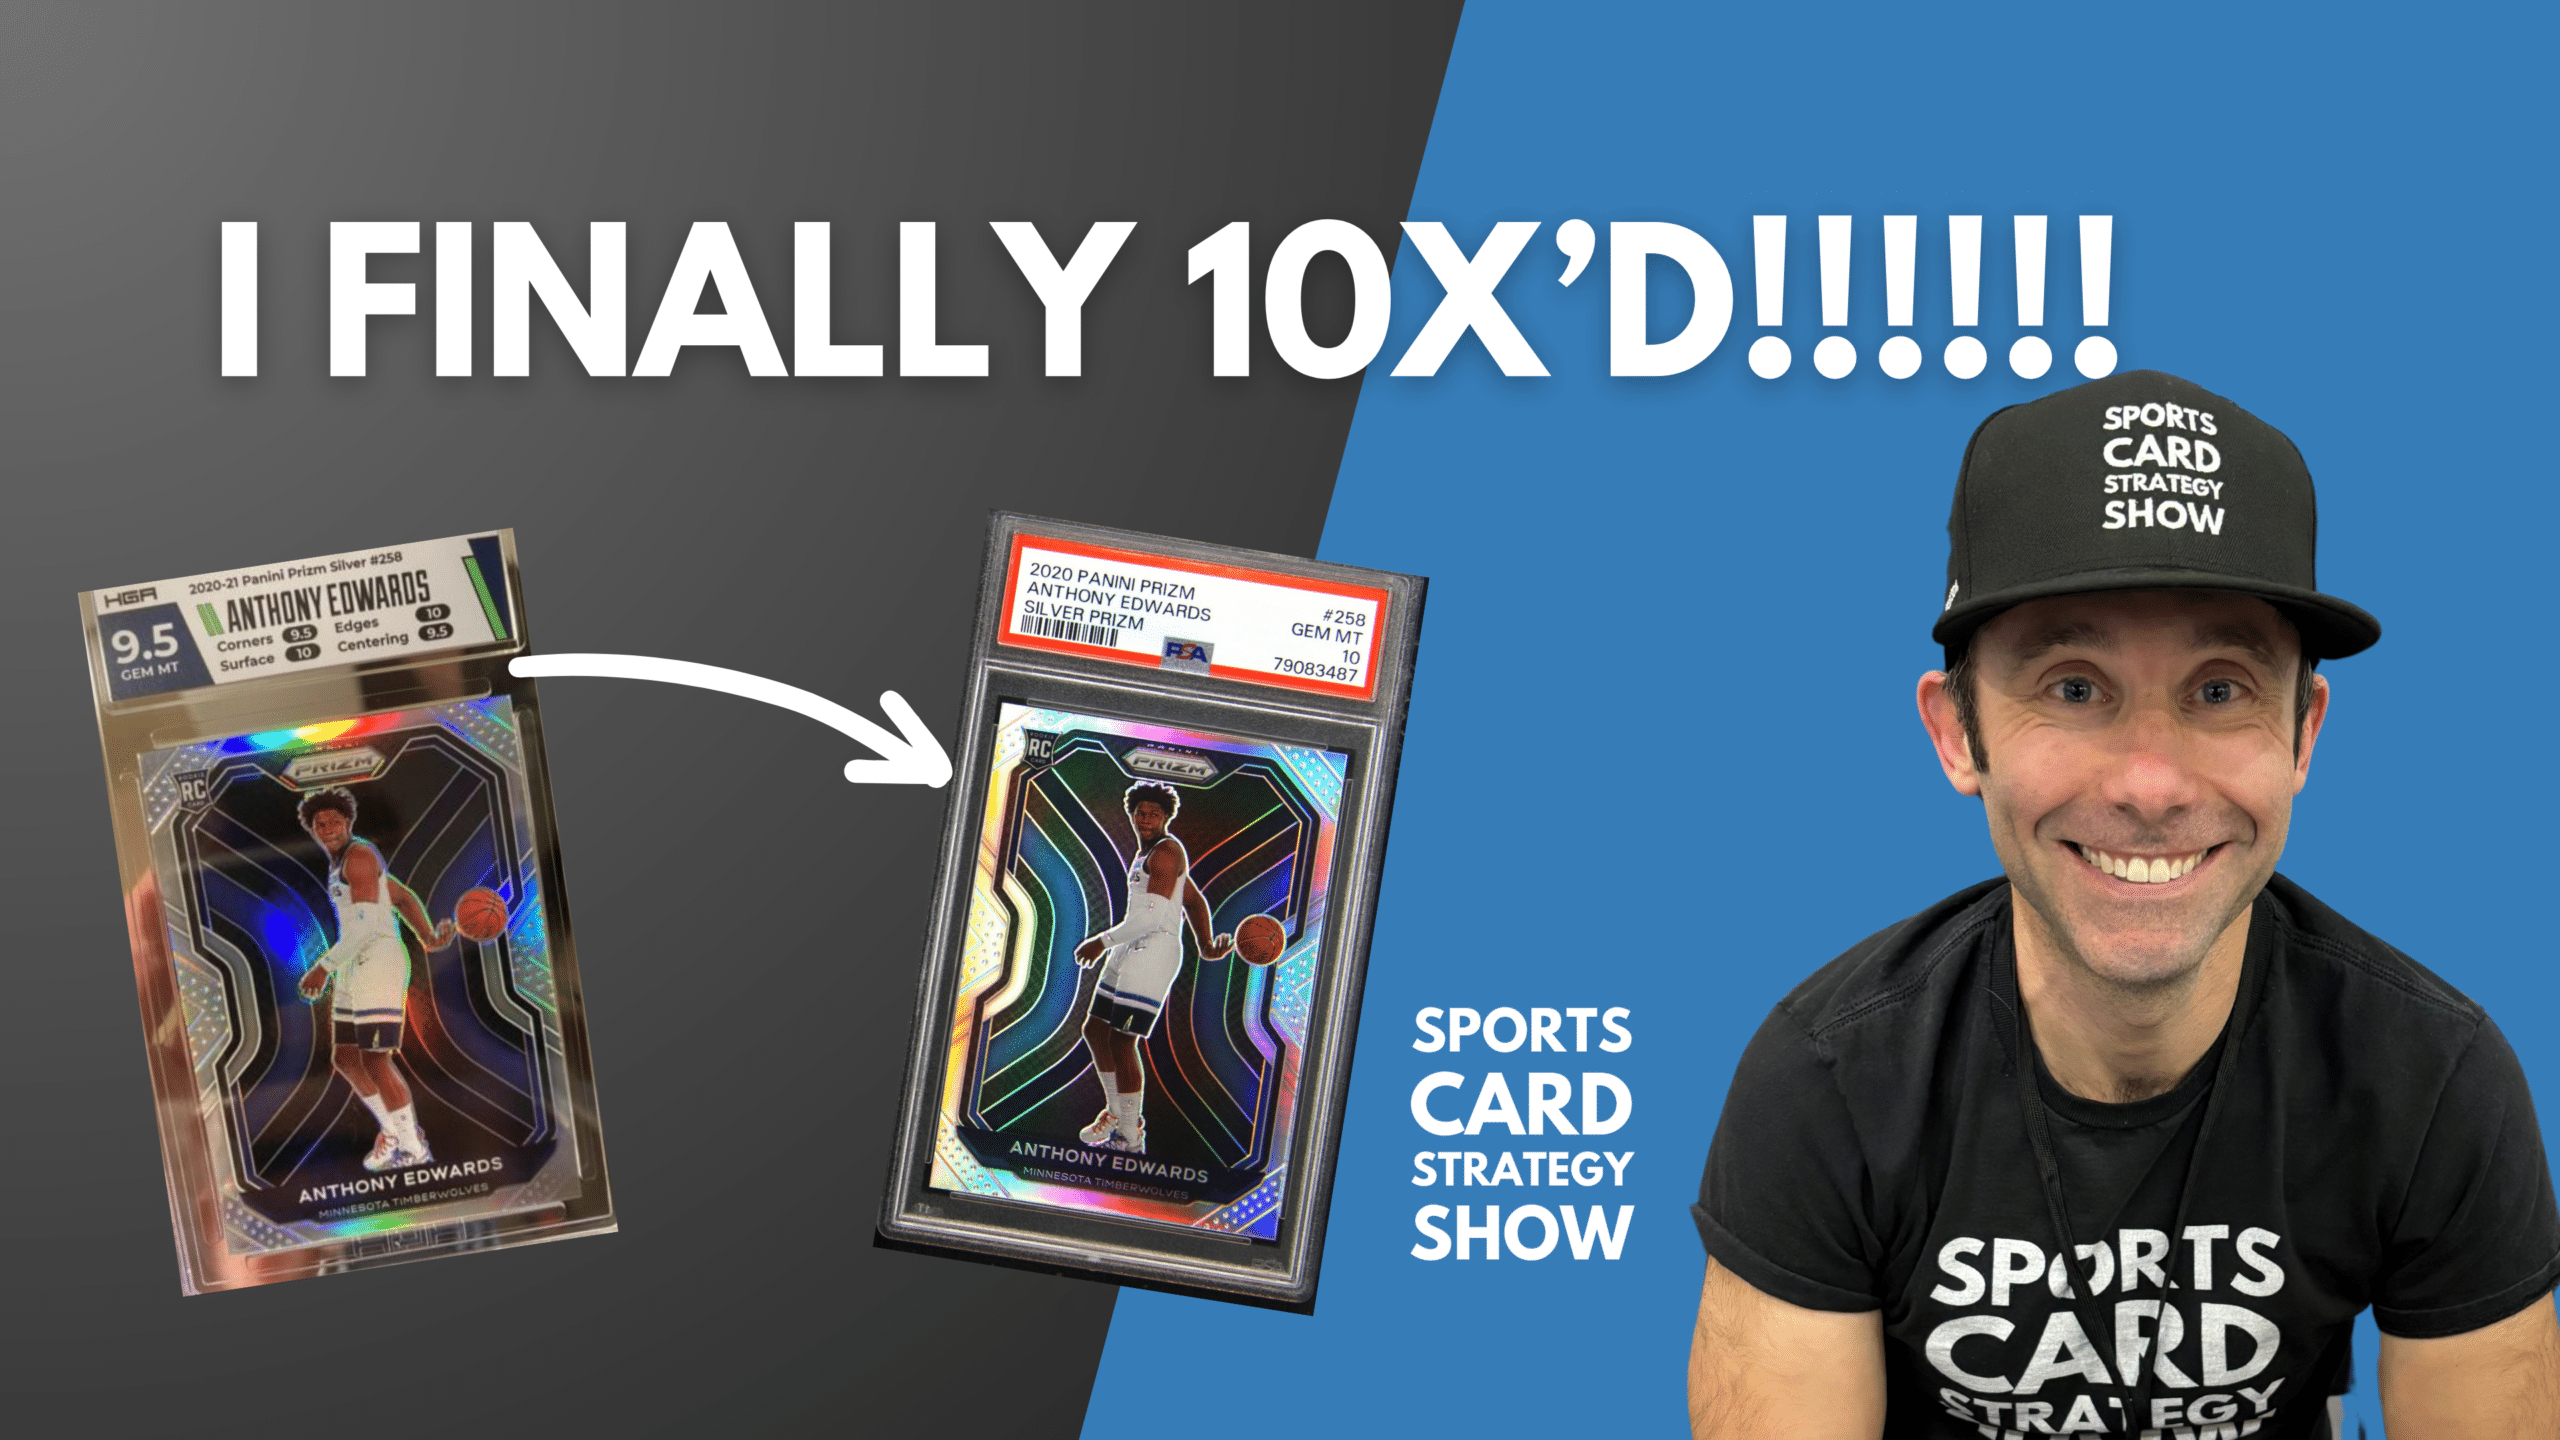 Top 5 Sports Cards To Buy Graded And Flip I Finally 10x’d A Flip!